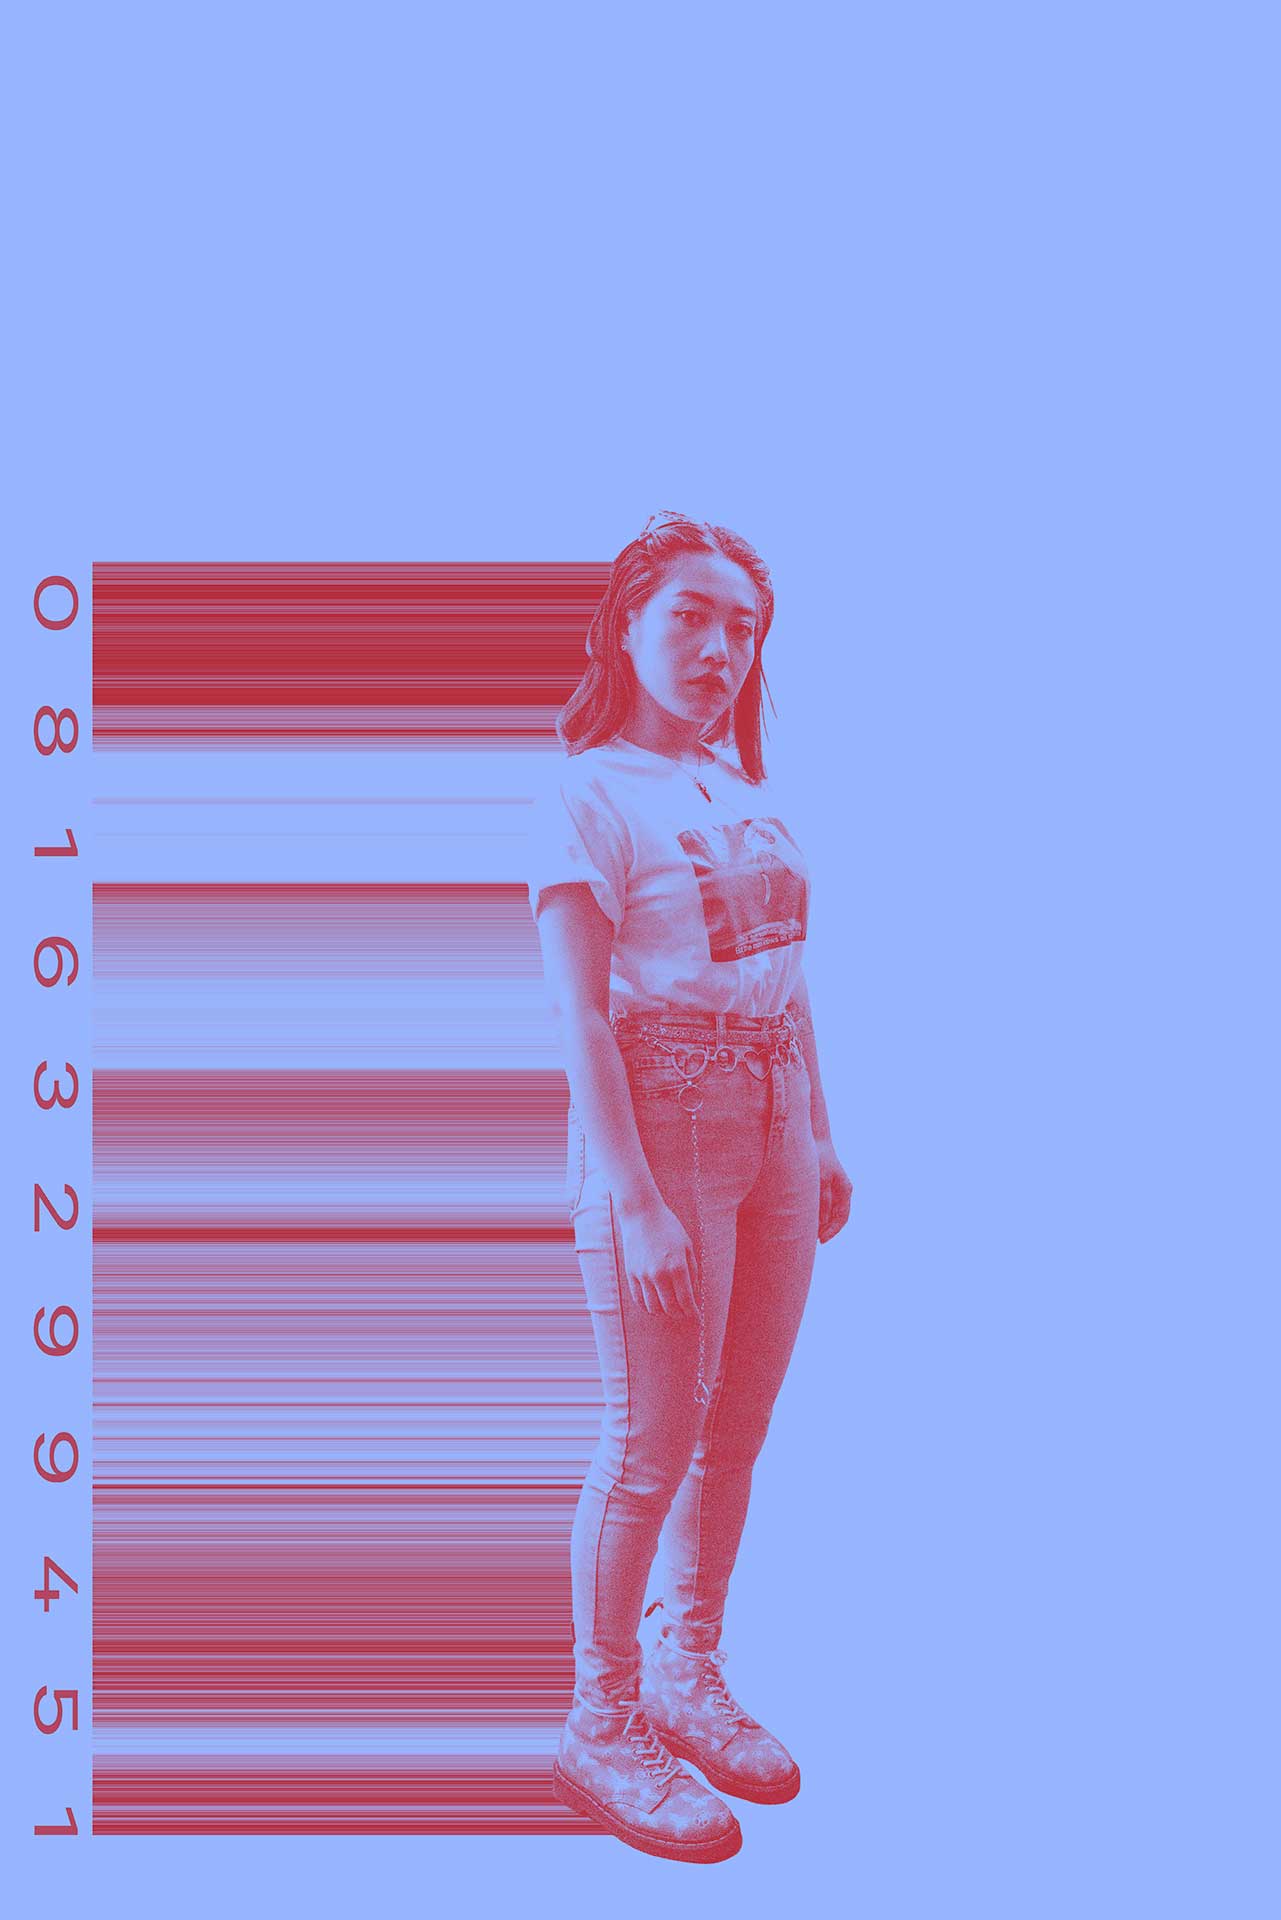 Two tone photo of a woman with a bar code coming out of her.